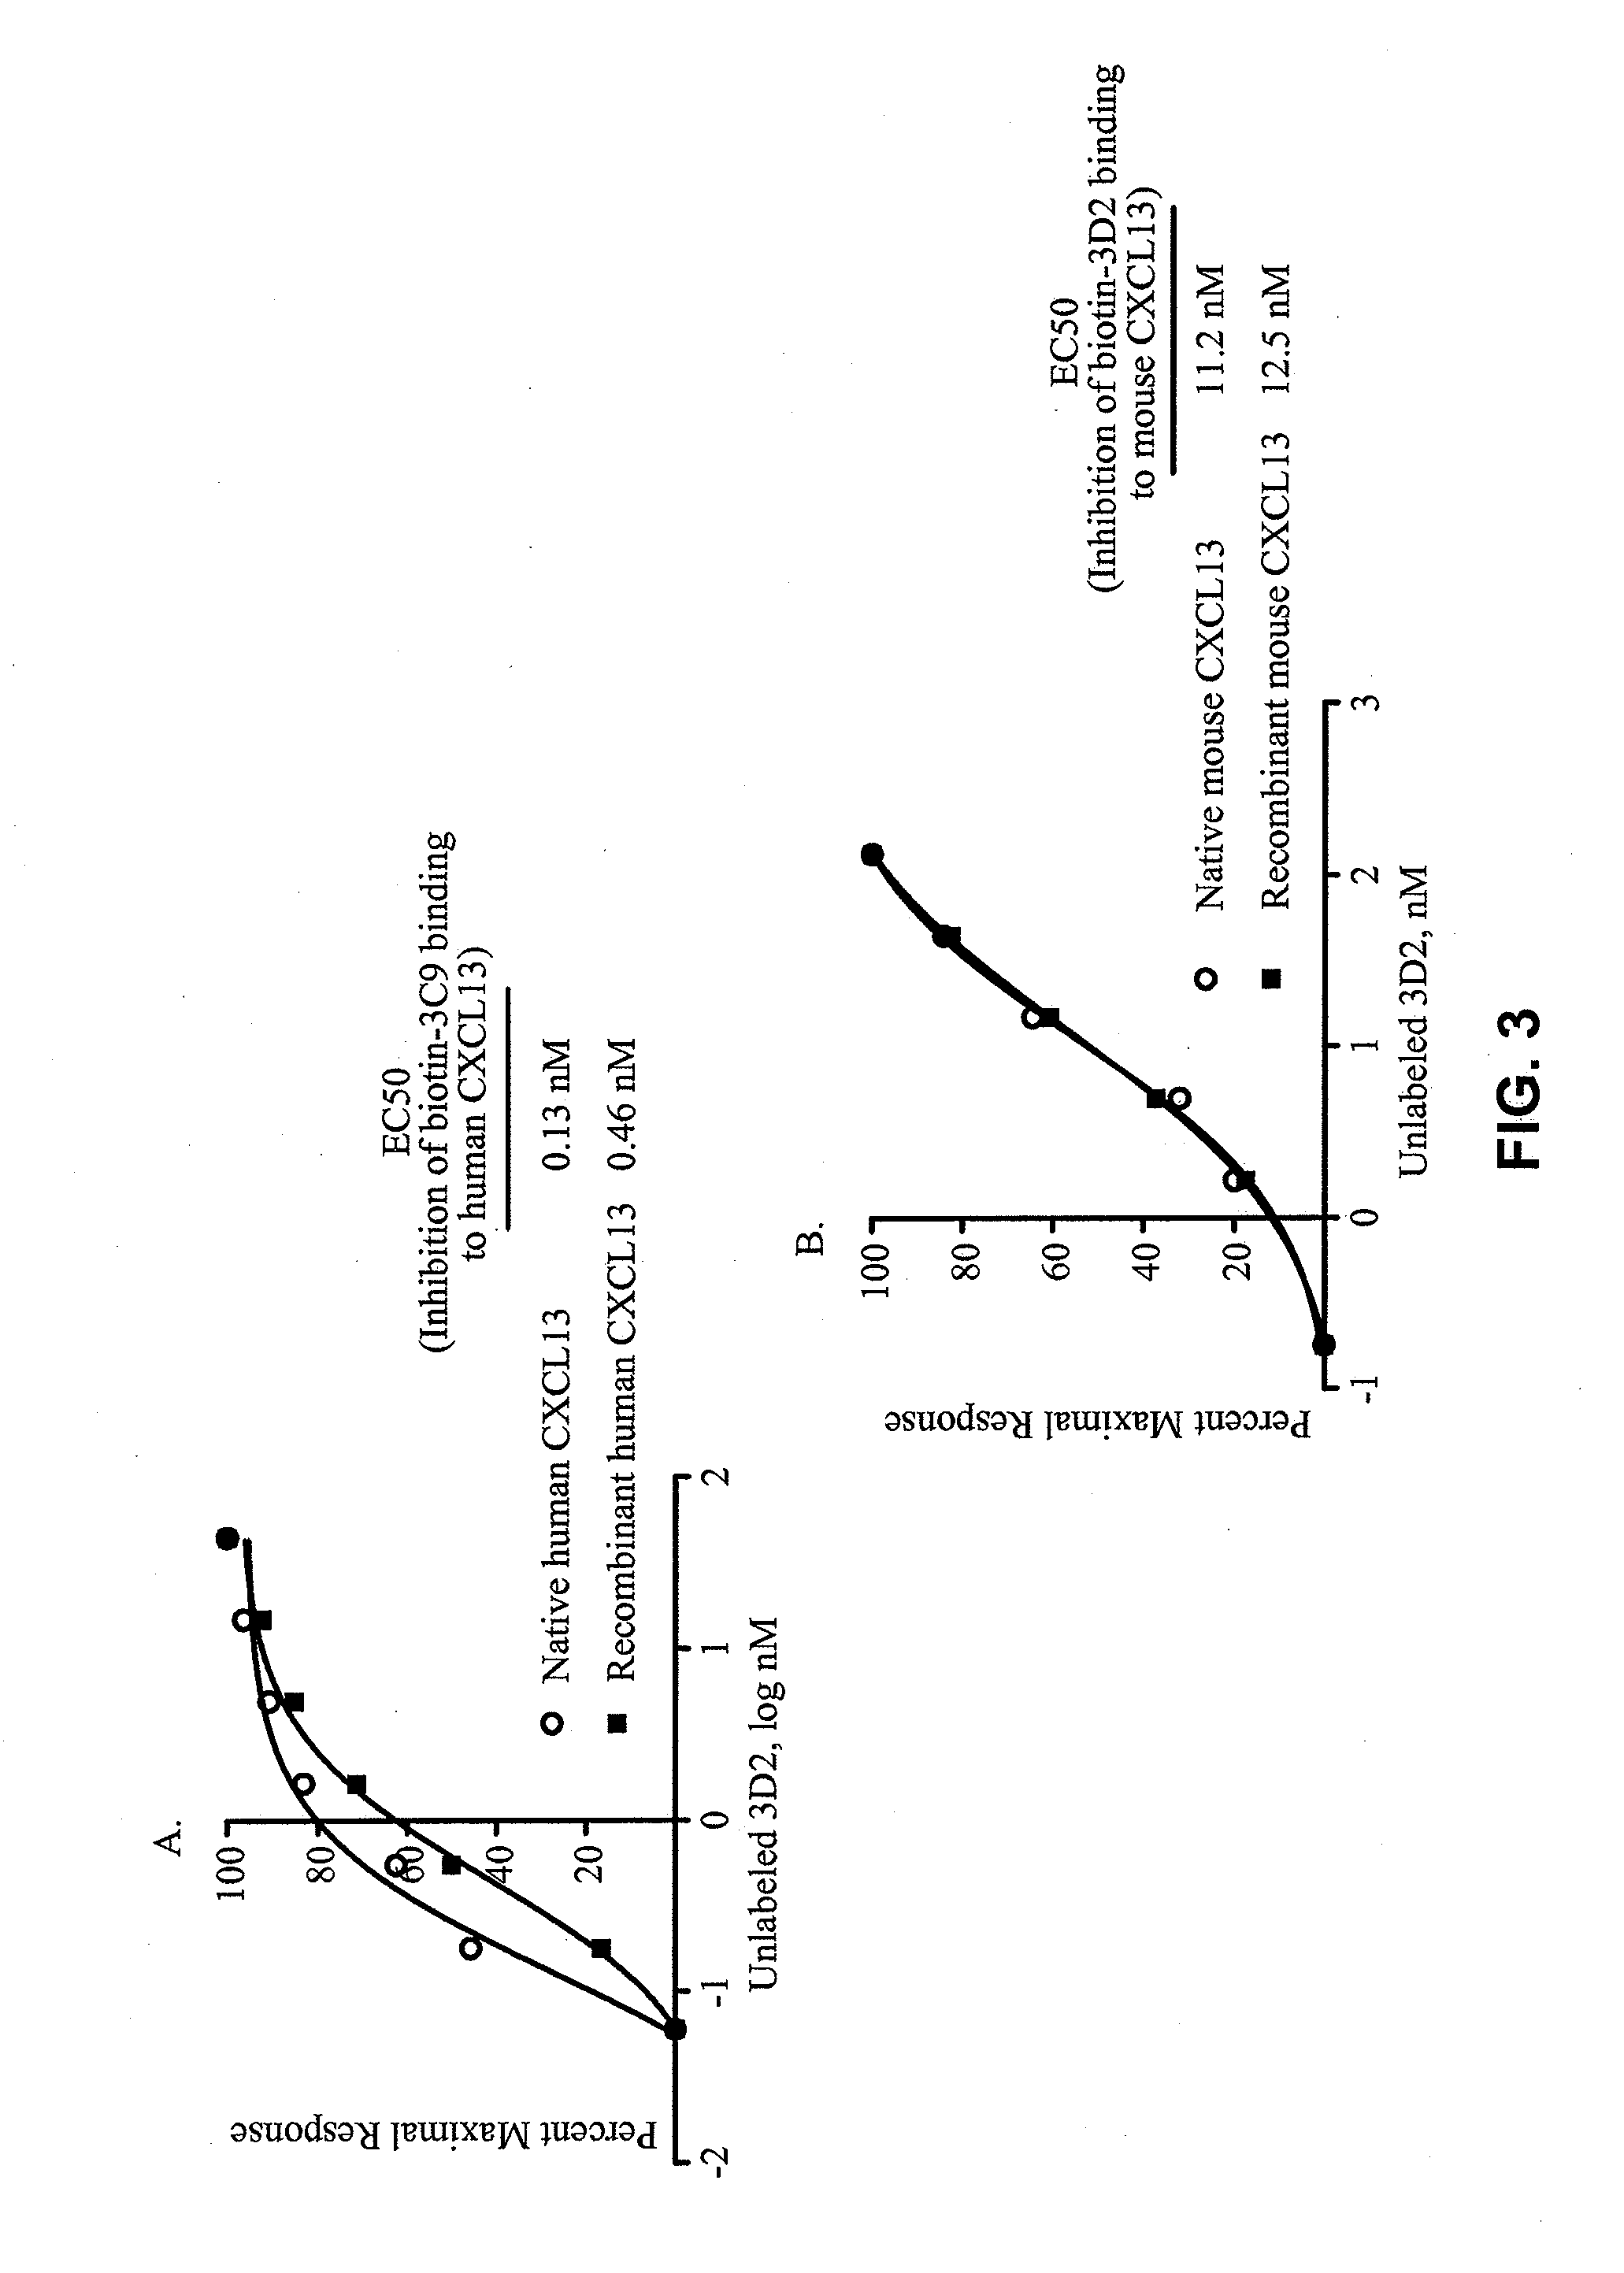 Anti-cxcl13 antibodies and associated epitope sequences